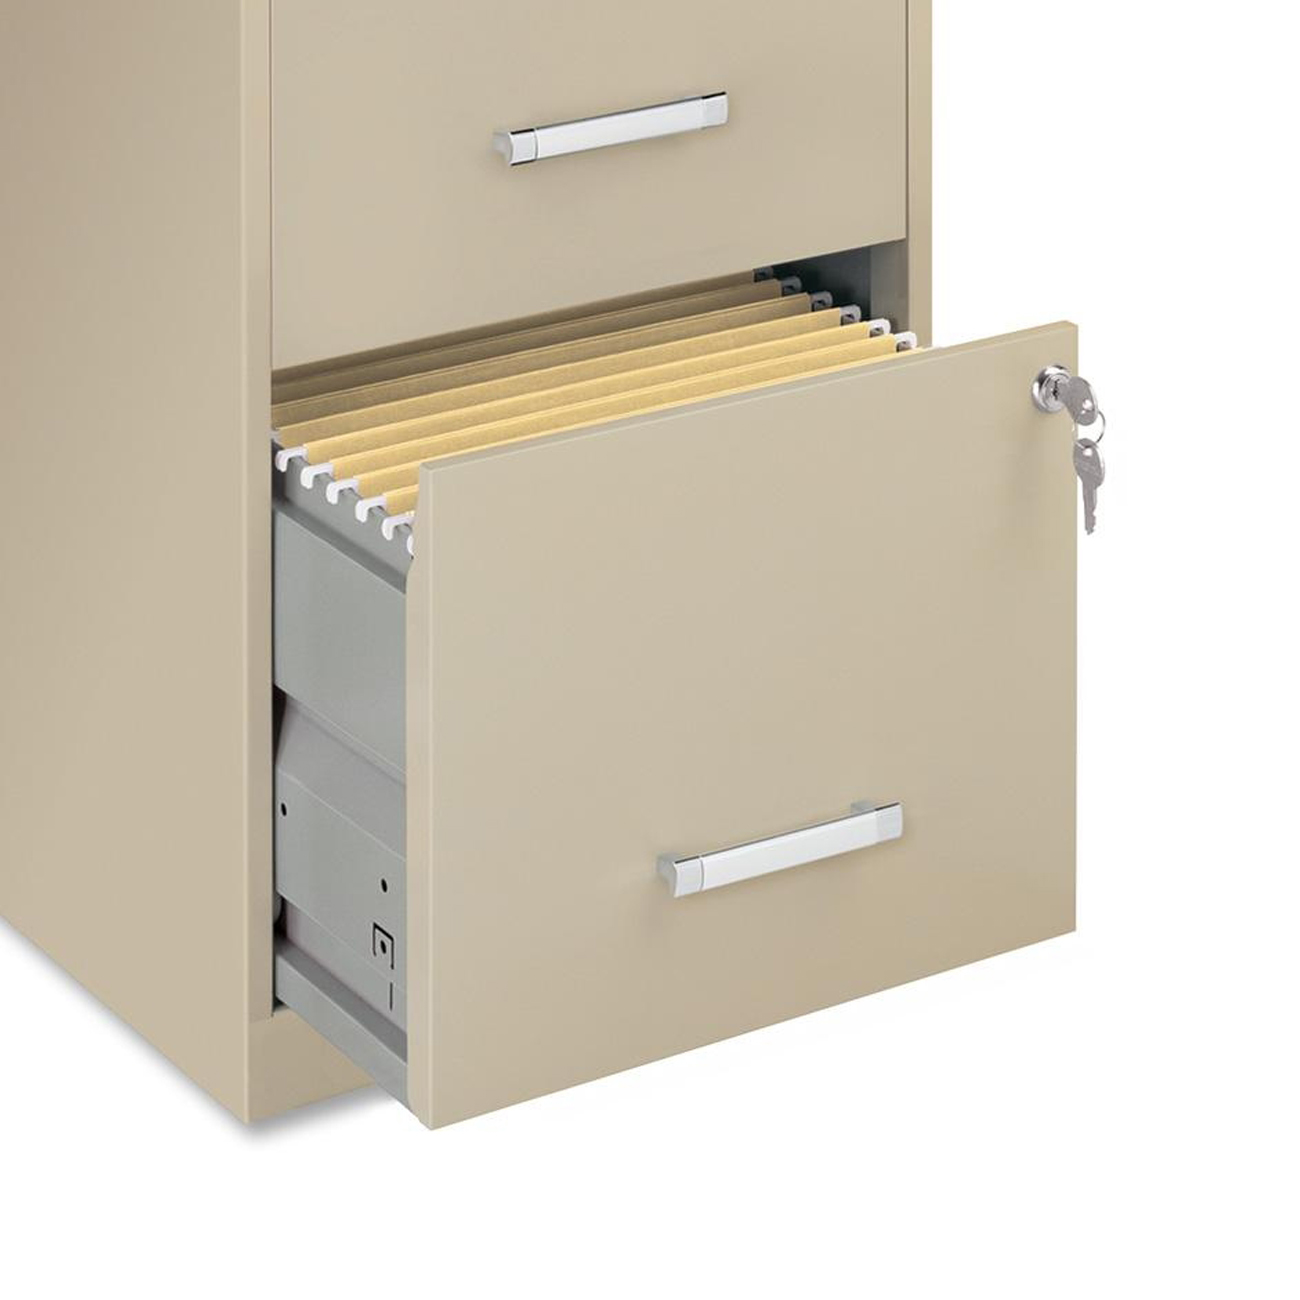 Space Solutions 2 Drawers Vertical Steel Lockable Filing Cabinet, Putty - image 2 of 3